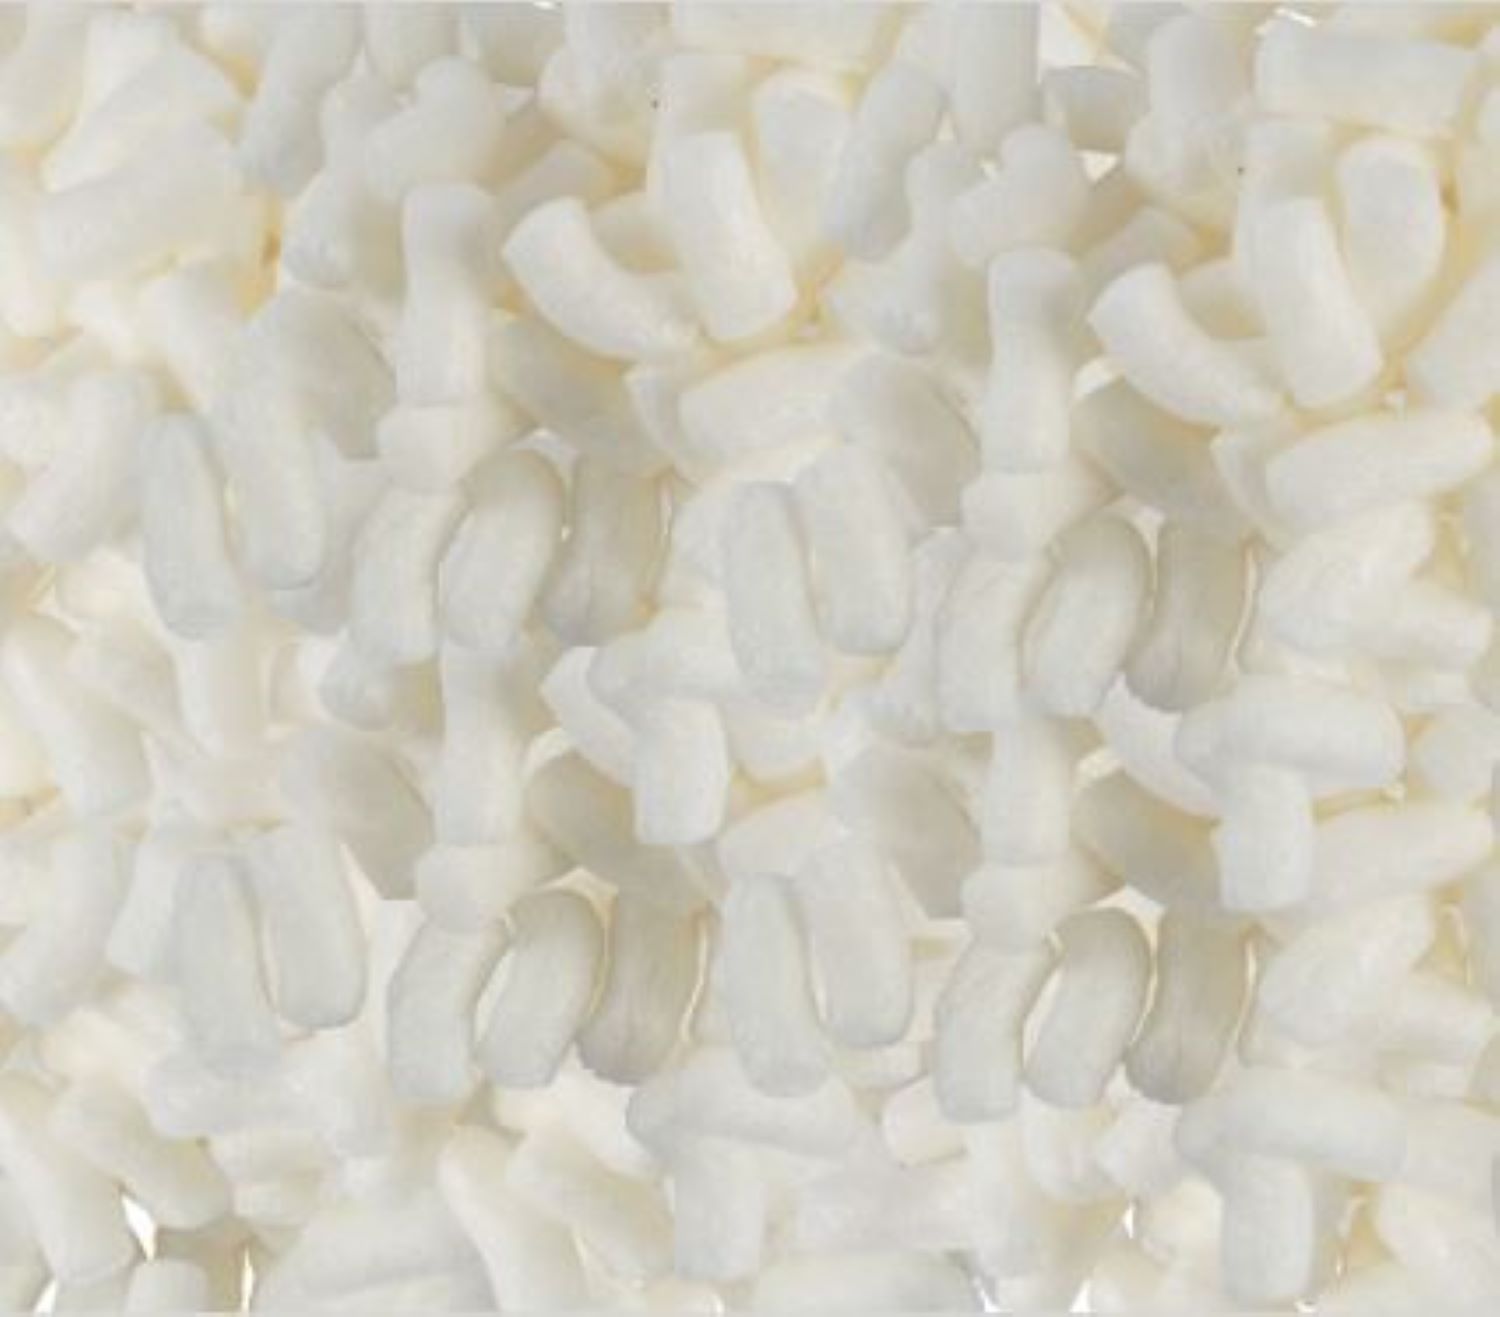 Eco-Friendly Packing Peanuts